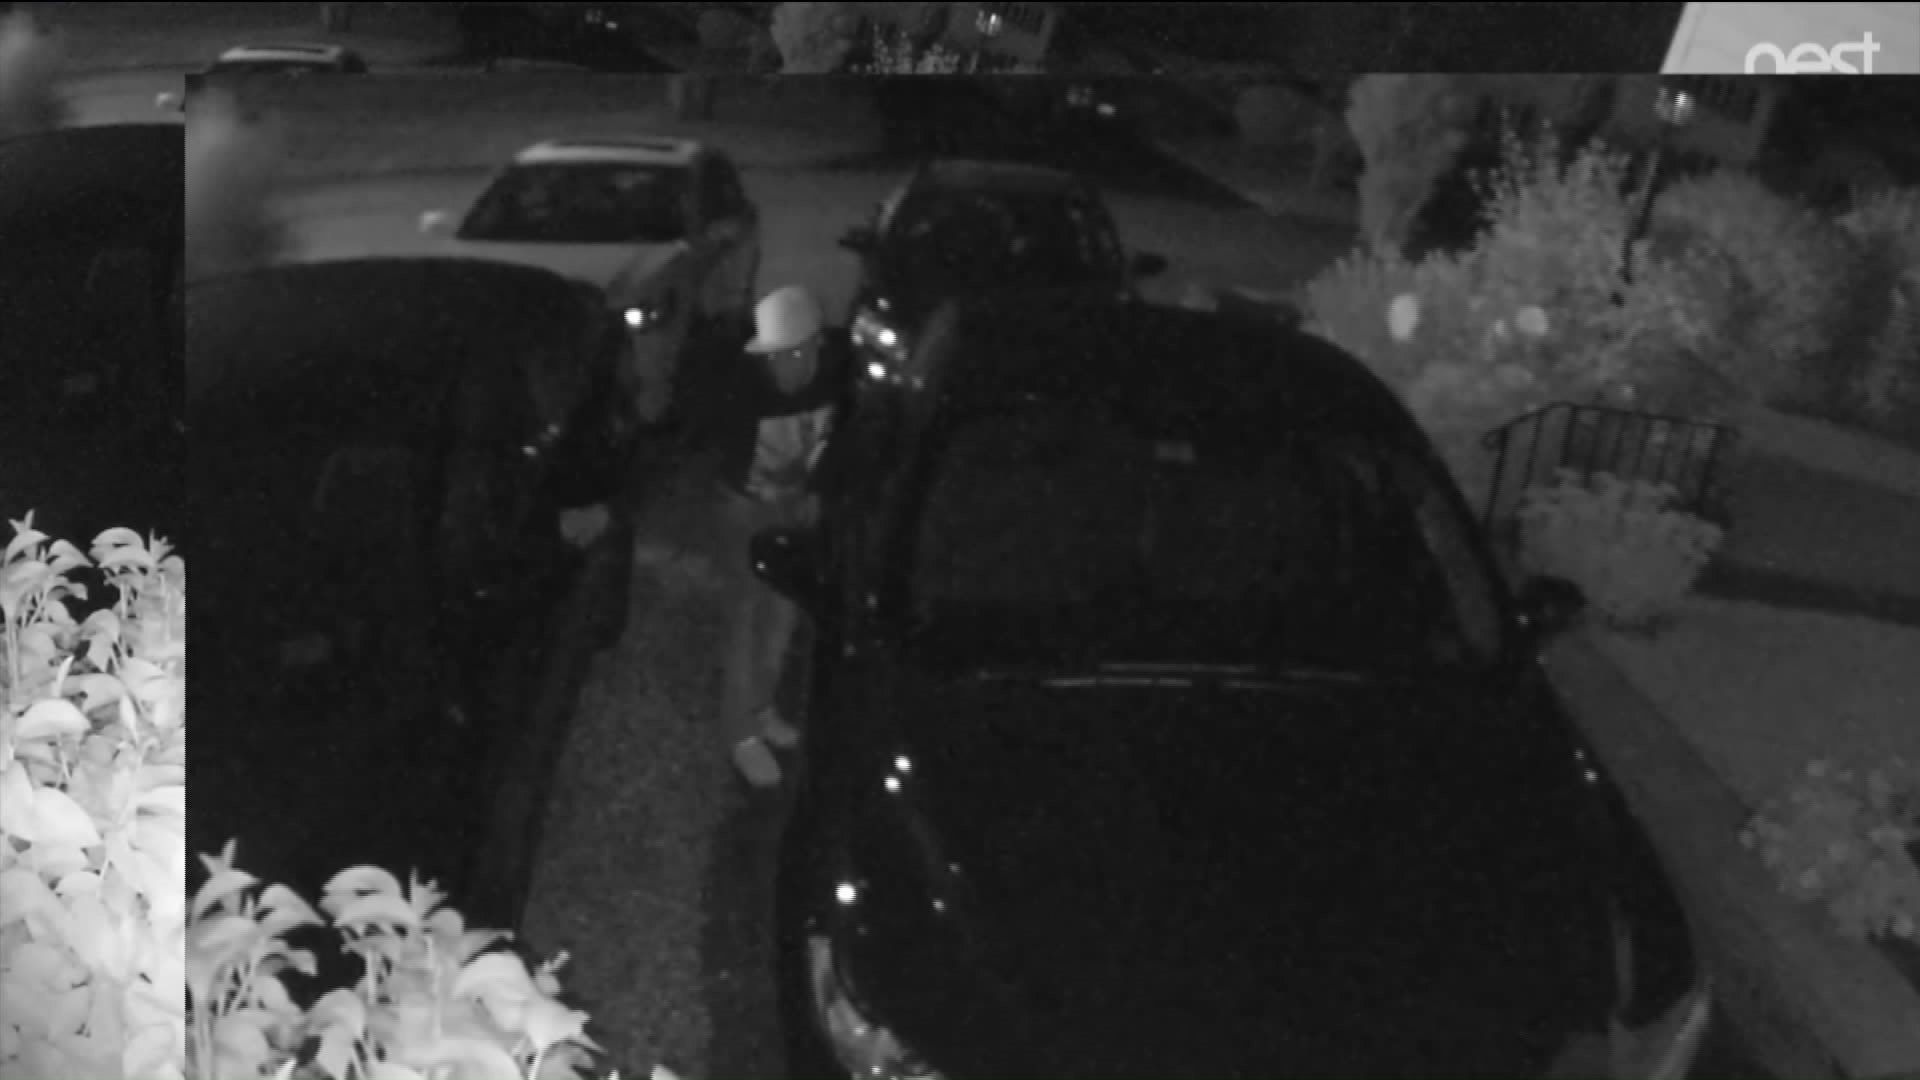 Police investigating car thefts